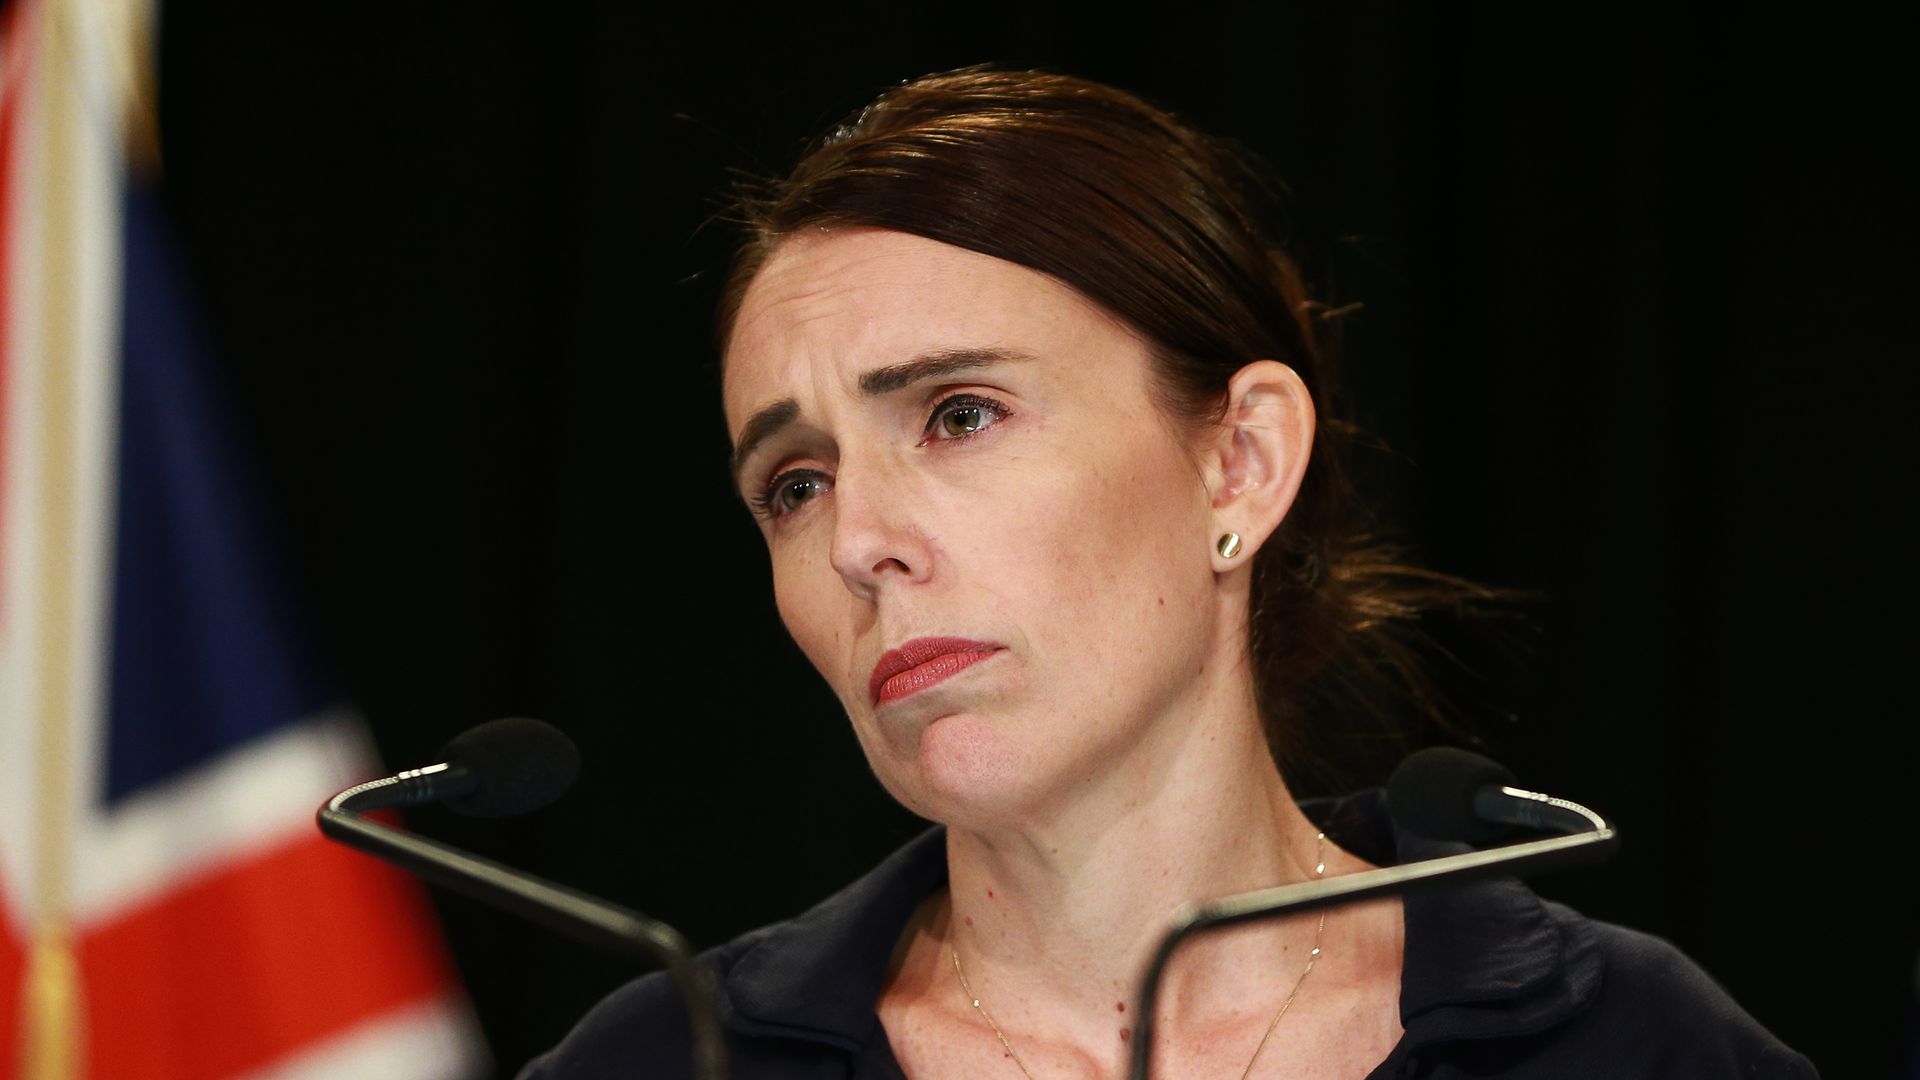 Jacinda Ardern says the live-stream issue goes well beyond what happened in New Zealand.